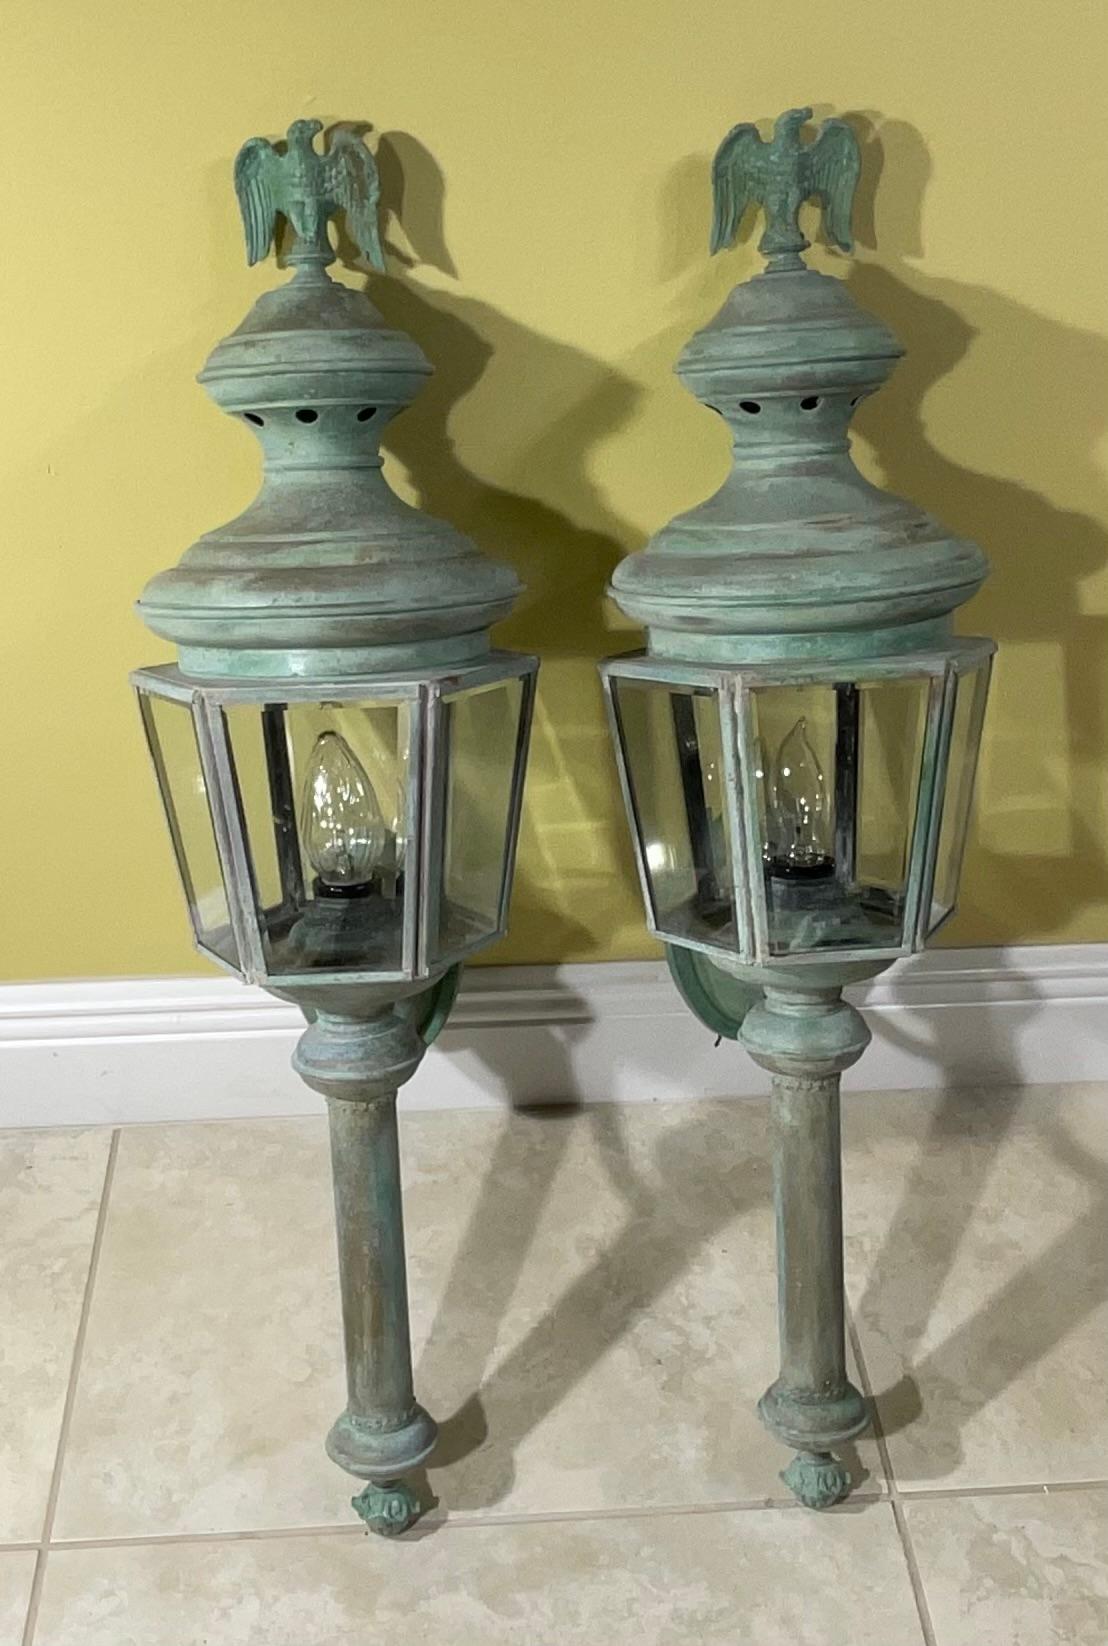 Pair of Vintage Brass Wall Lantern For Sale 1